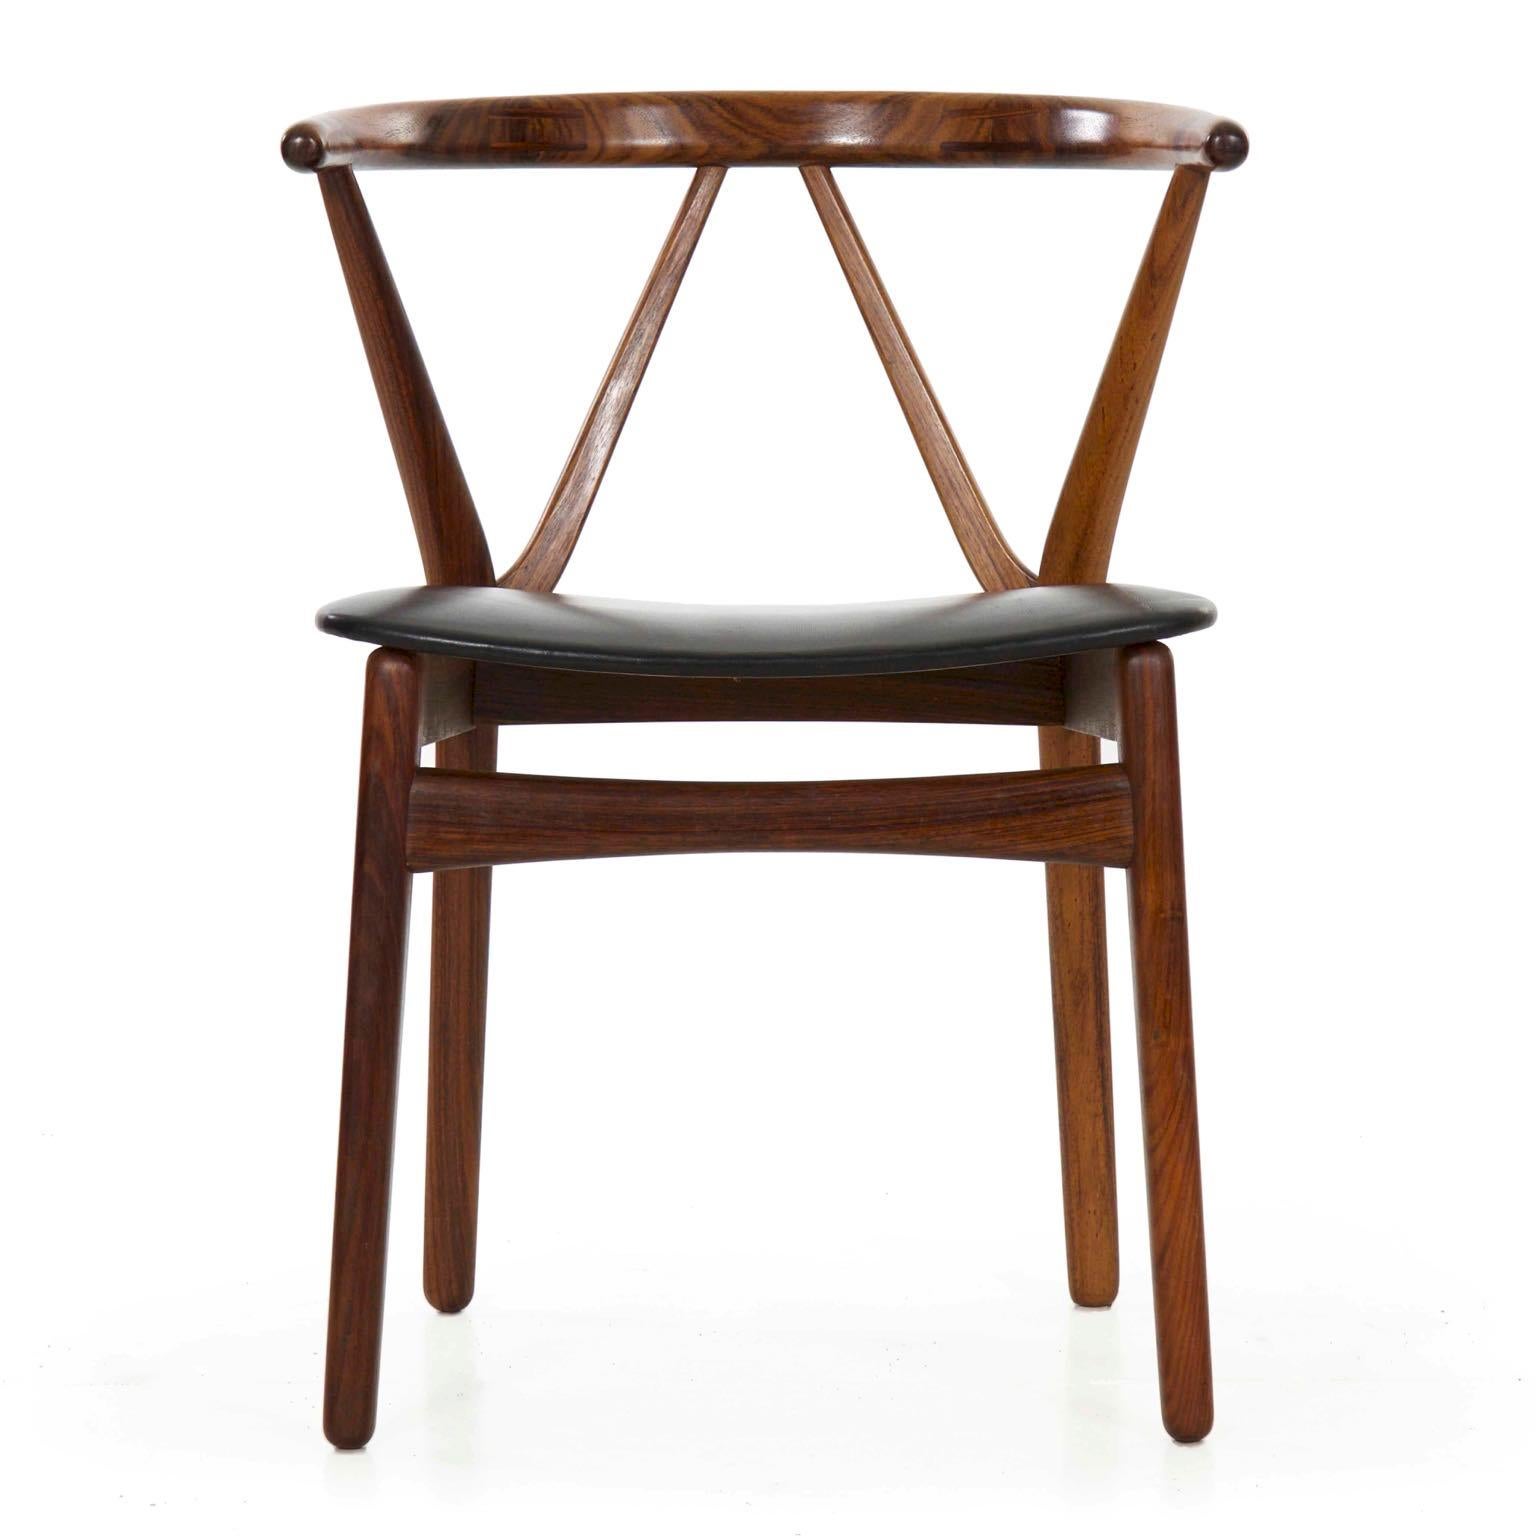 Danish rosewood hoop back armchair by Kjaernulf for Hansen
Model 255; Bruno Hansen stamp to underside, Denmark, circa 1950s.

A very finely made chair designed by Henning Kjaernulf for retail by Bruno Hansen, the frame is carved from rosewood